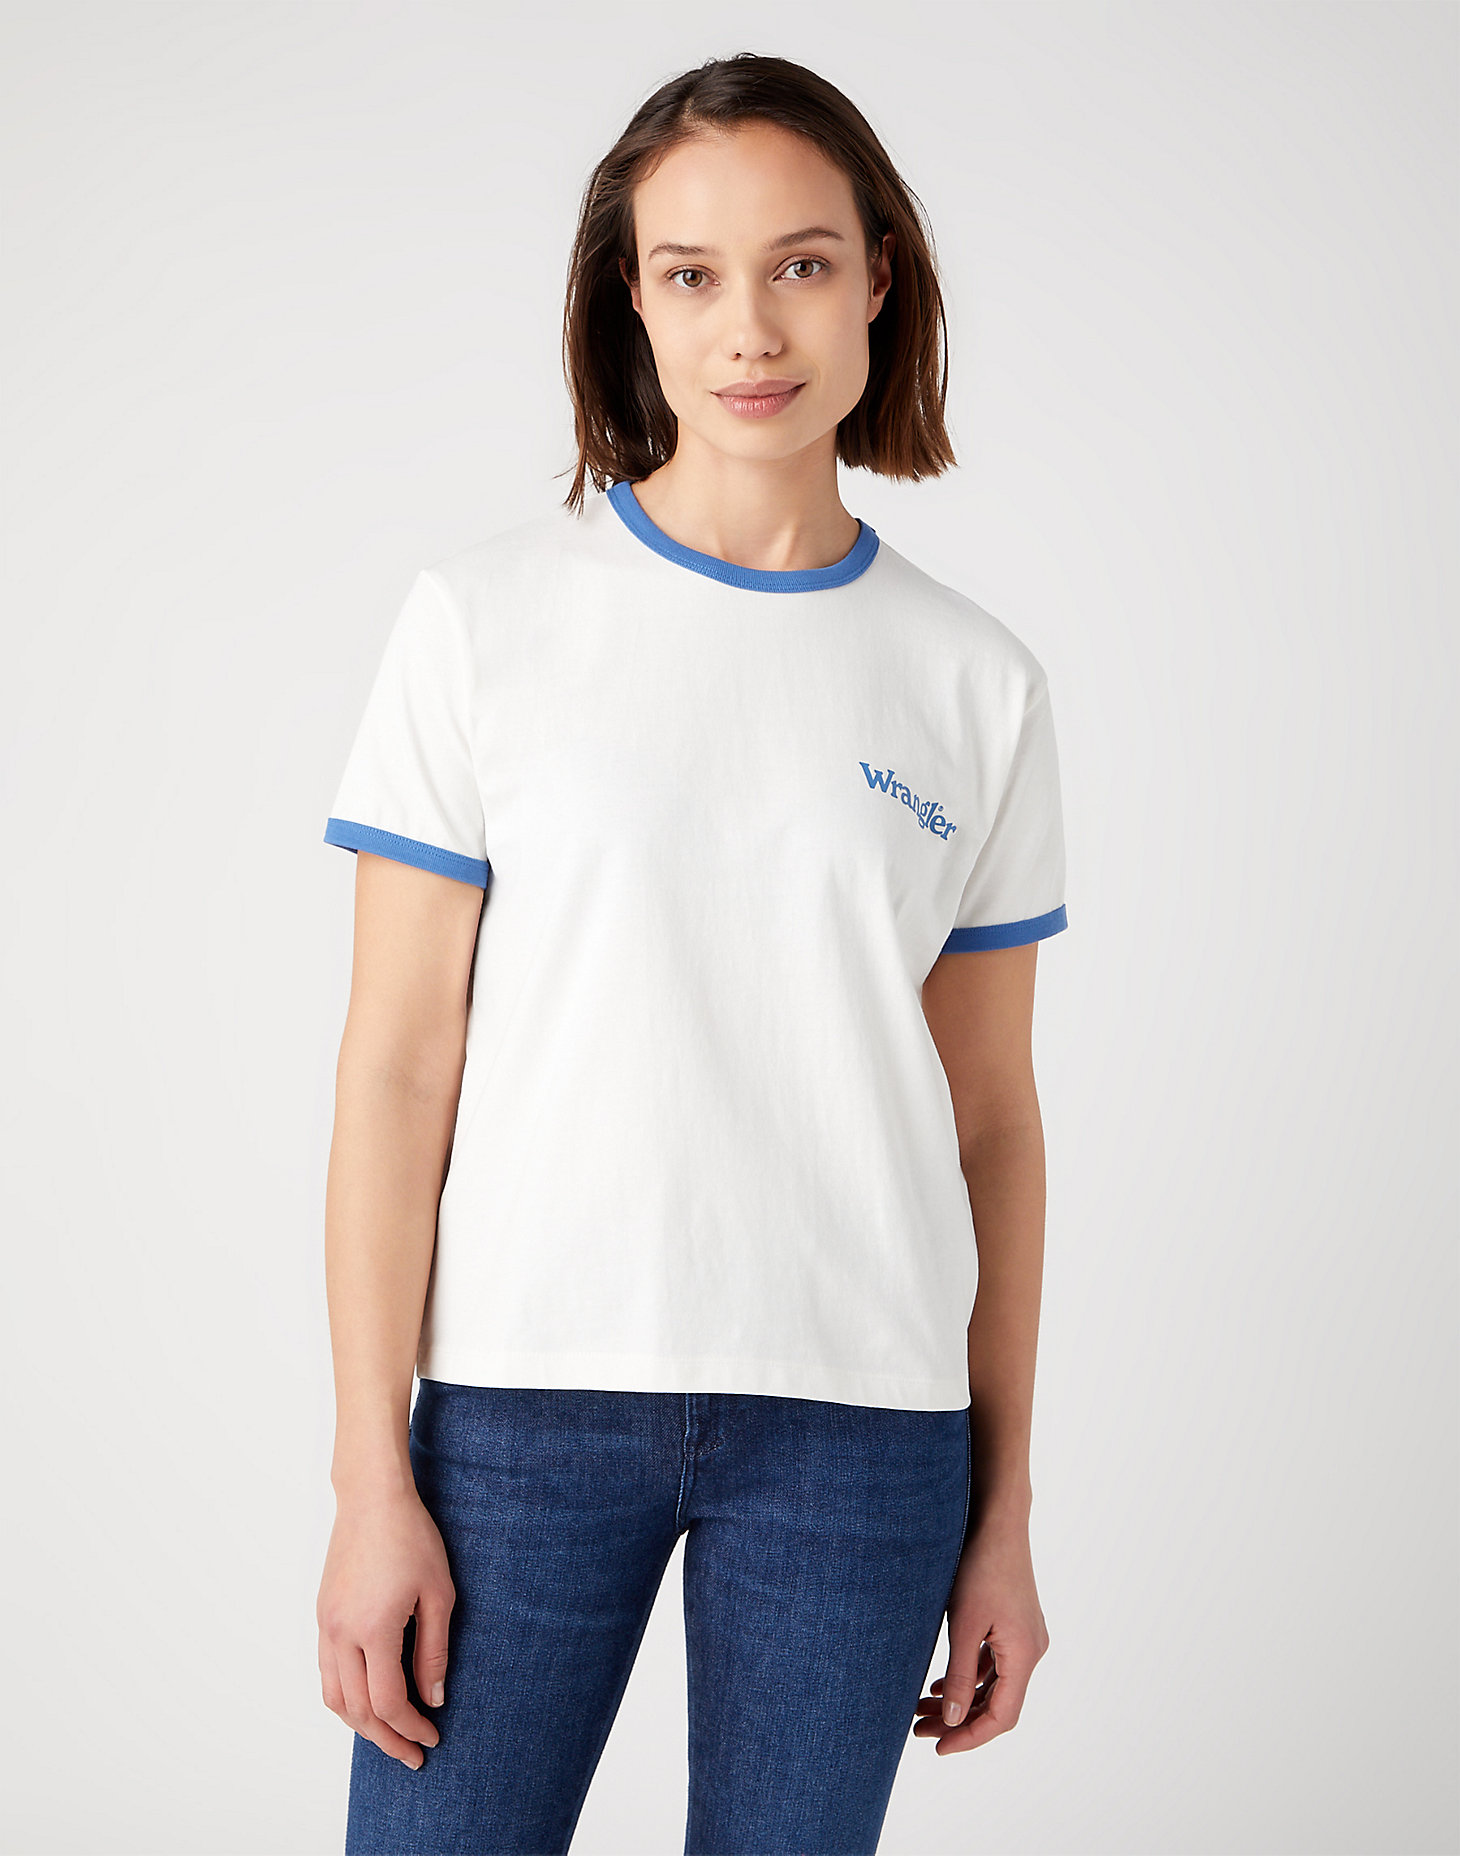 Relaxed Ringer Tee in Worn White alternative view 1